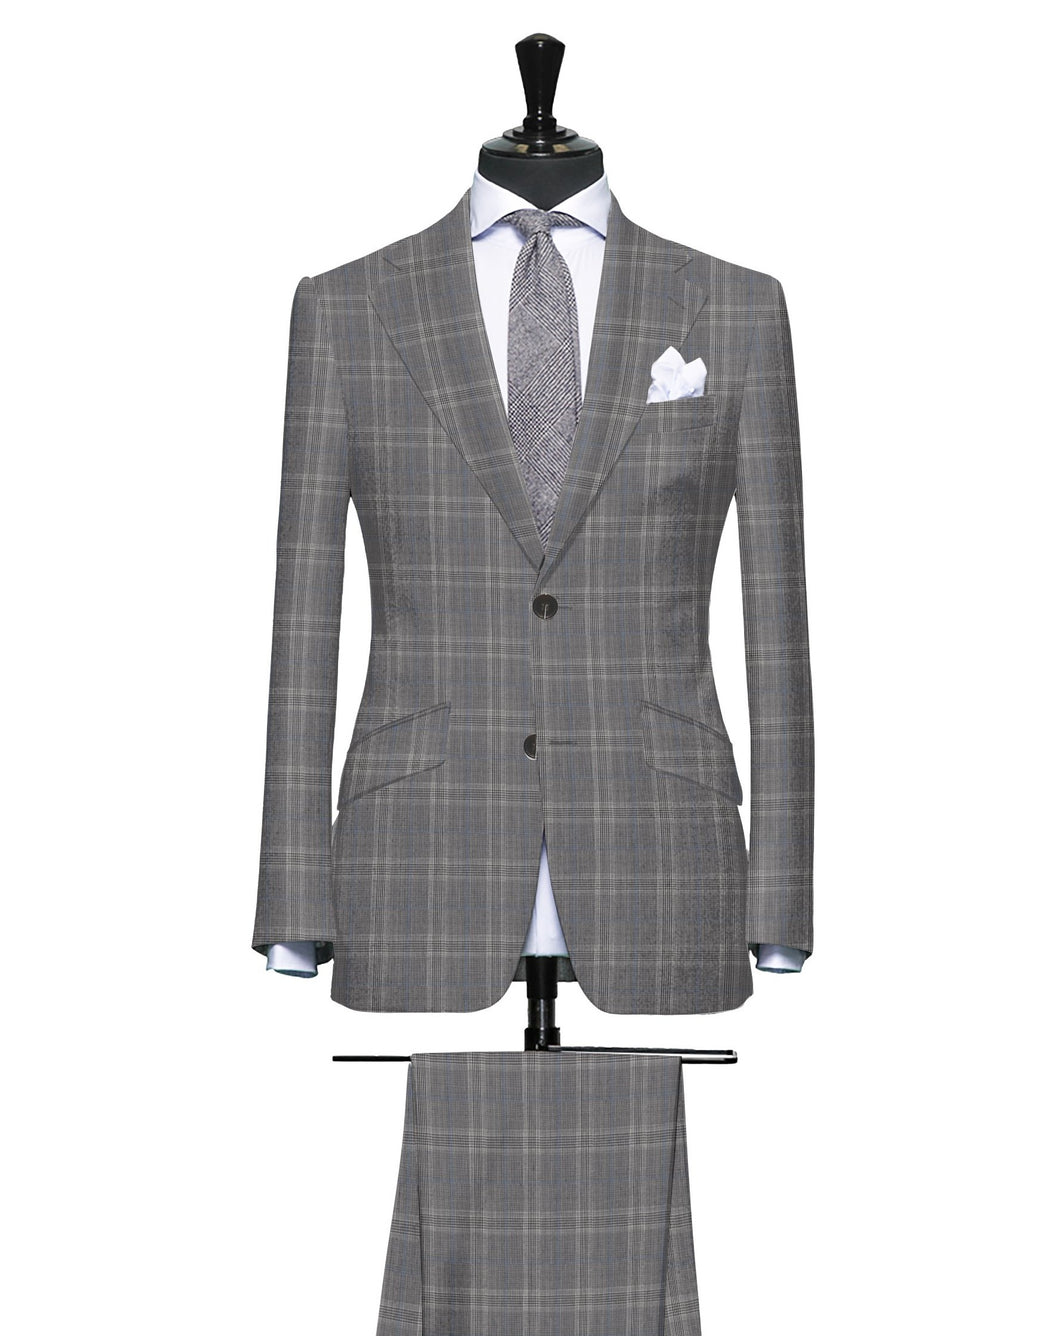 Grey and Charcoal with Light Blue Glen Plaid, Super 150, Wool